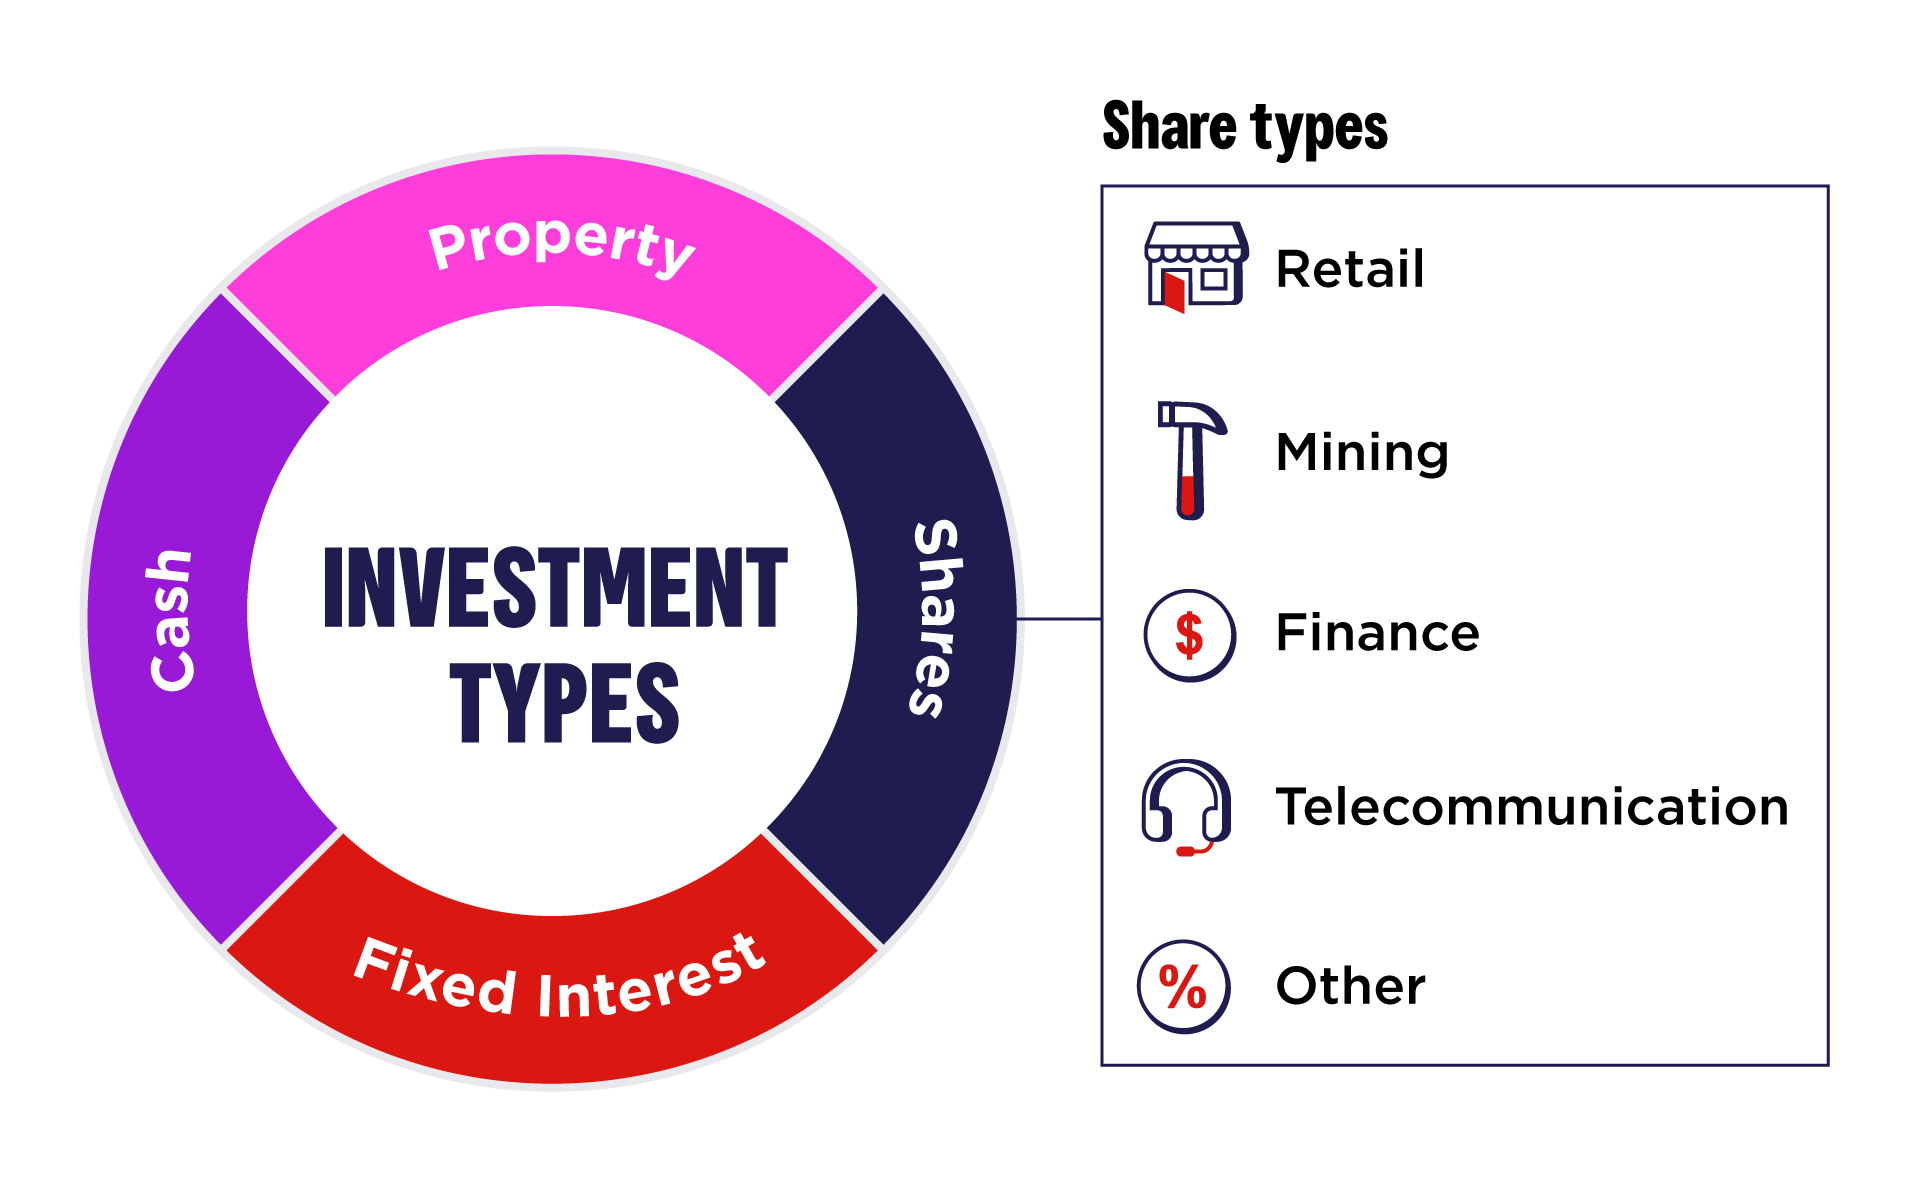 Illustration shows there are 4 main investment types: cash, property, fixed interest and shares. Share types include retail, mining, finance and others.